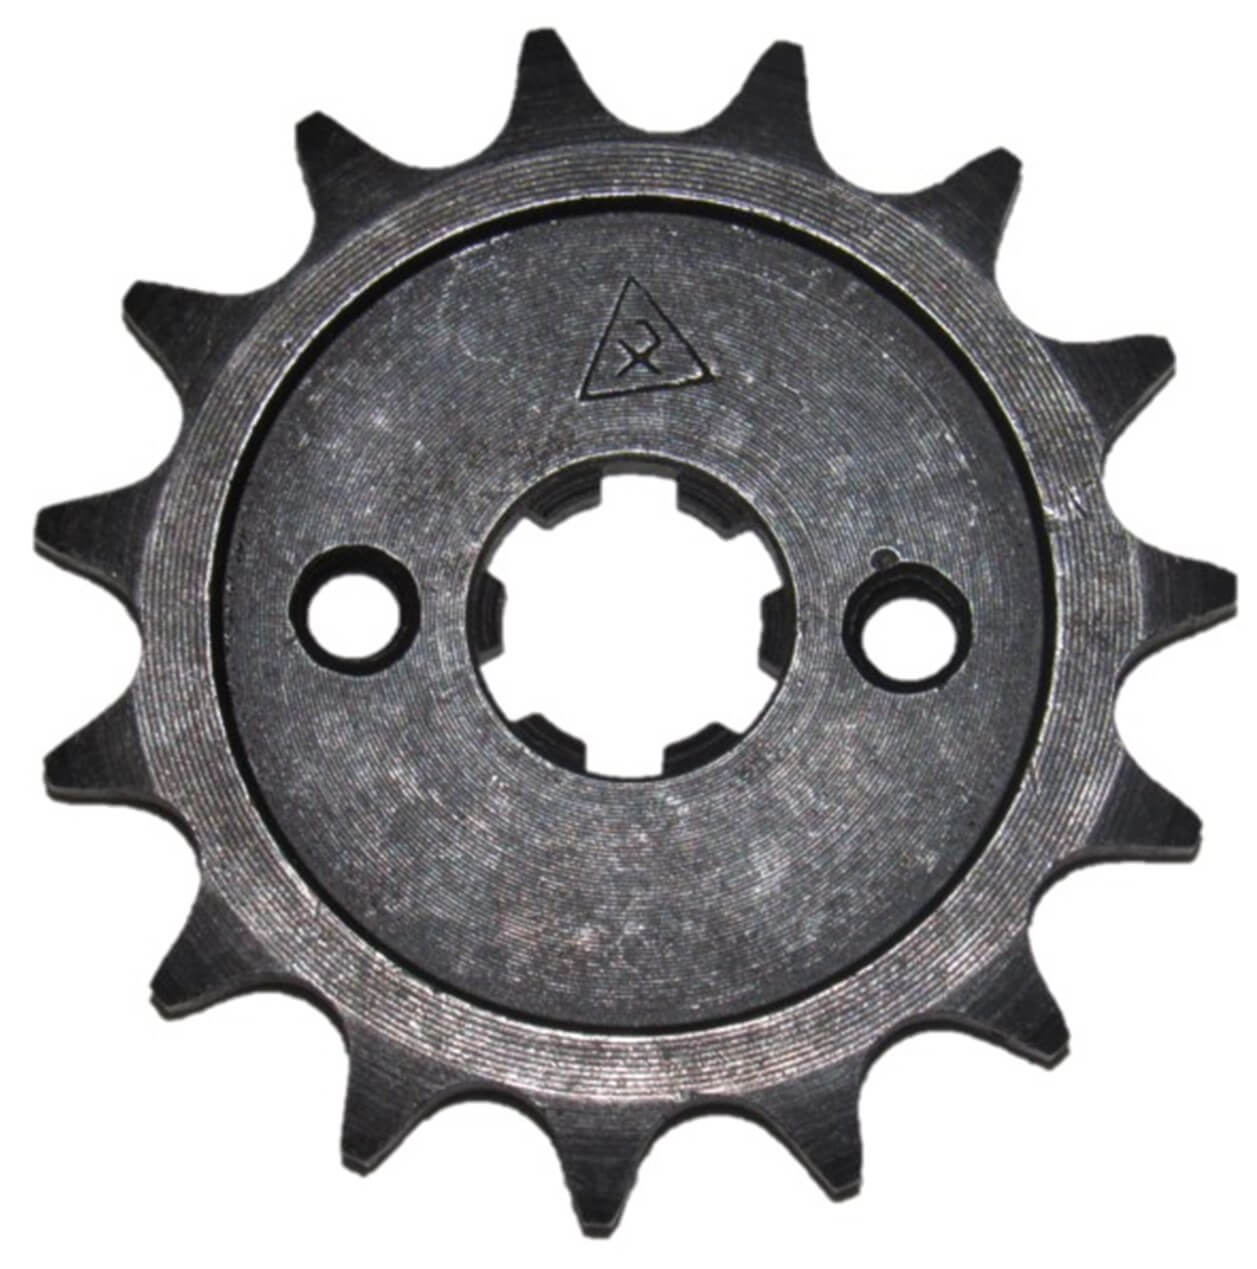 Front Sprocket #428 15th Bolts=2x30mm Ctr to Ctr, Splines=6 Shaft=14/17mm (shortest/longest point) 50-125cc MOST CHINESE ATVs